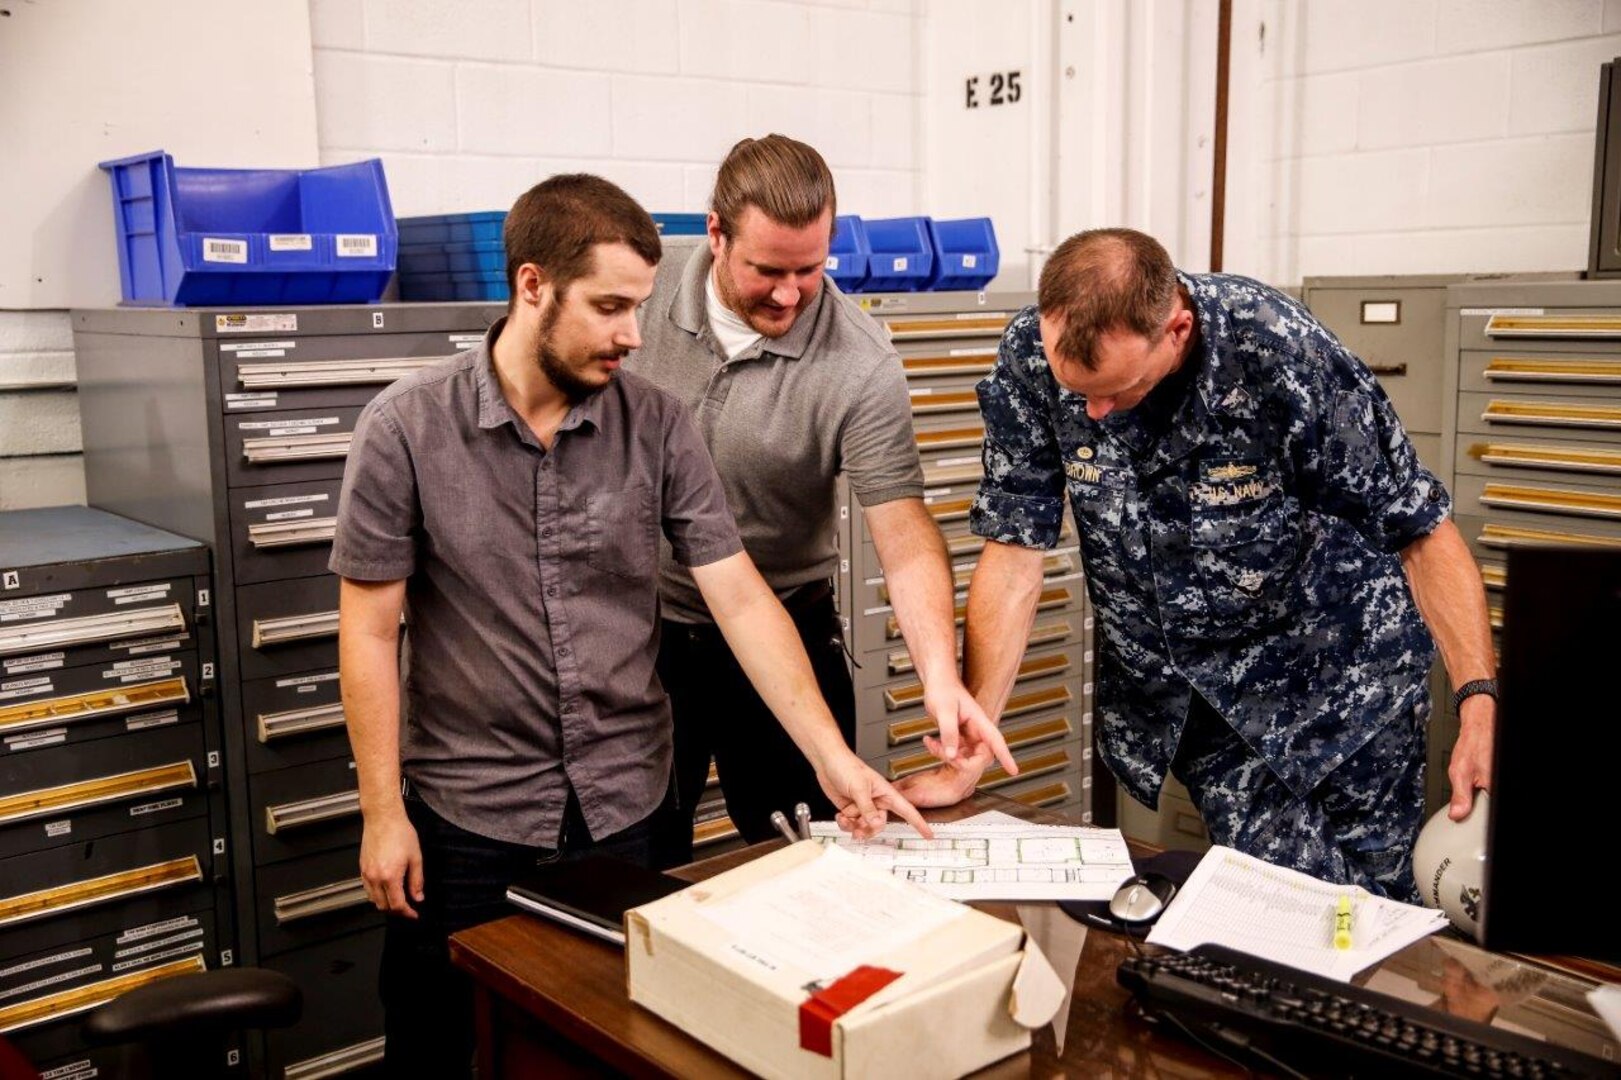 Image: Norfolk Naval Shipyard employees William Divers and Benjamin Kreps show shipyard commander Capt. Scott Brown the consolidated tool storage space intended to improve efficiency and maximize efficient use of shipyard workers' time.